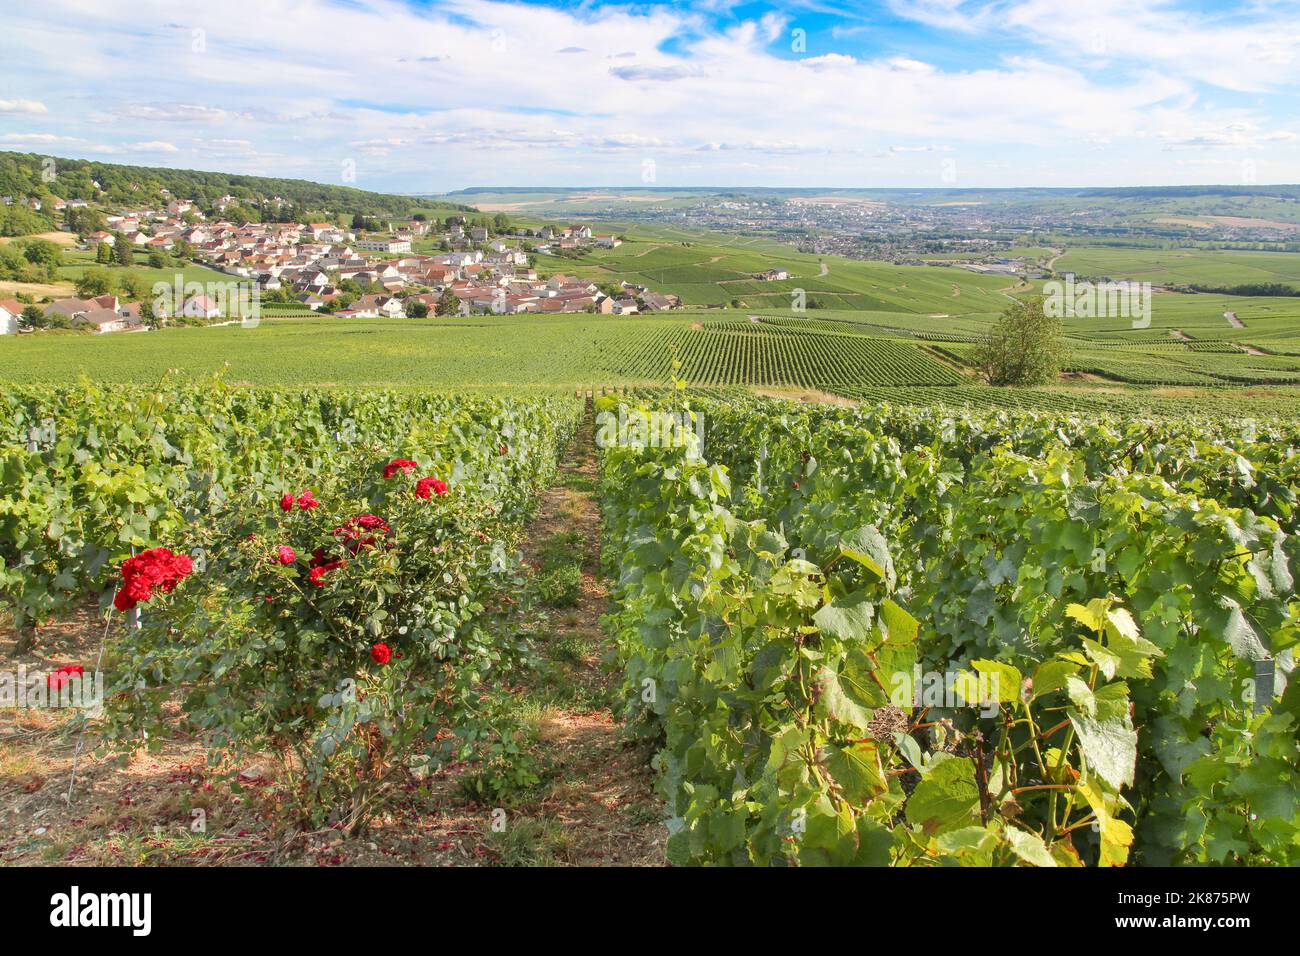 Vineyard growing grapes for Champagne, near Epernay, Marne, France, Europe Stock Photo